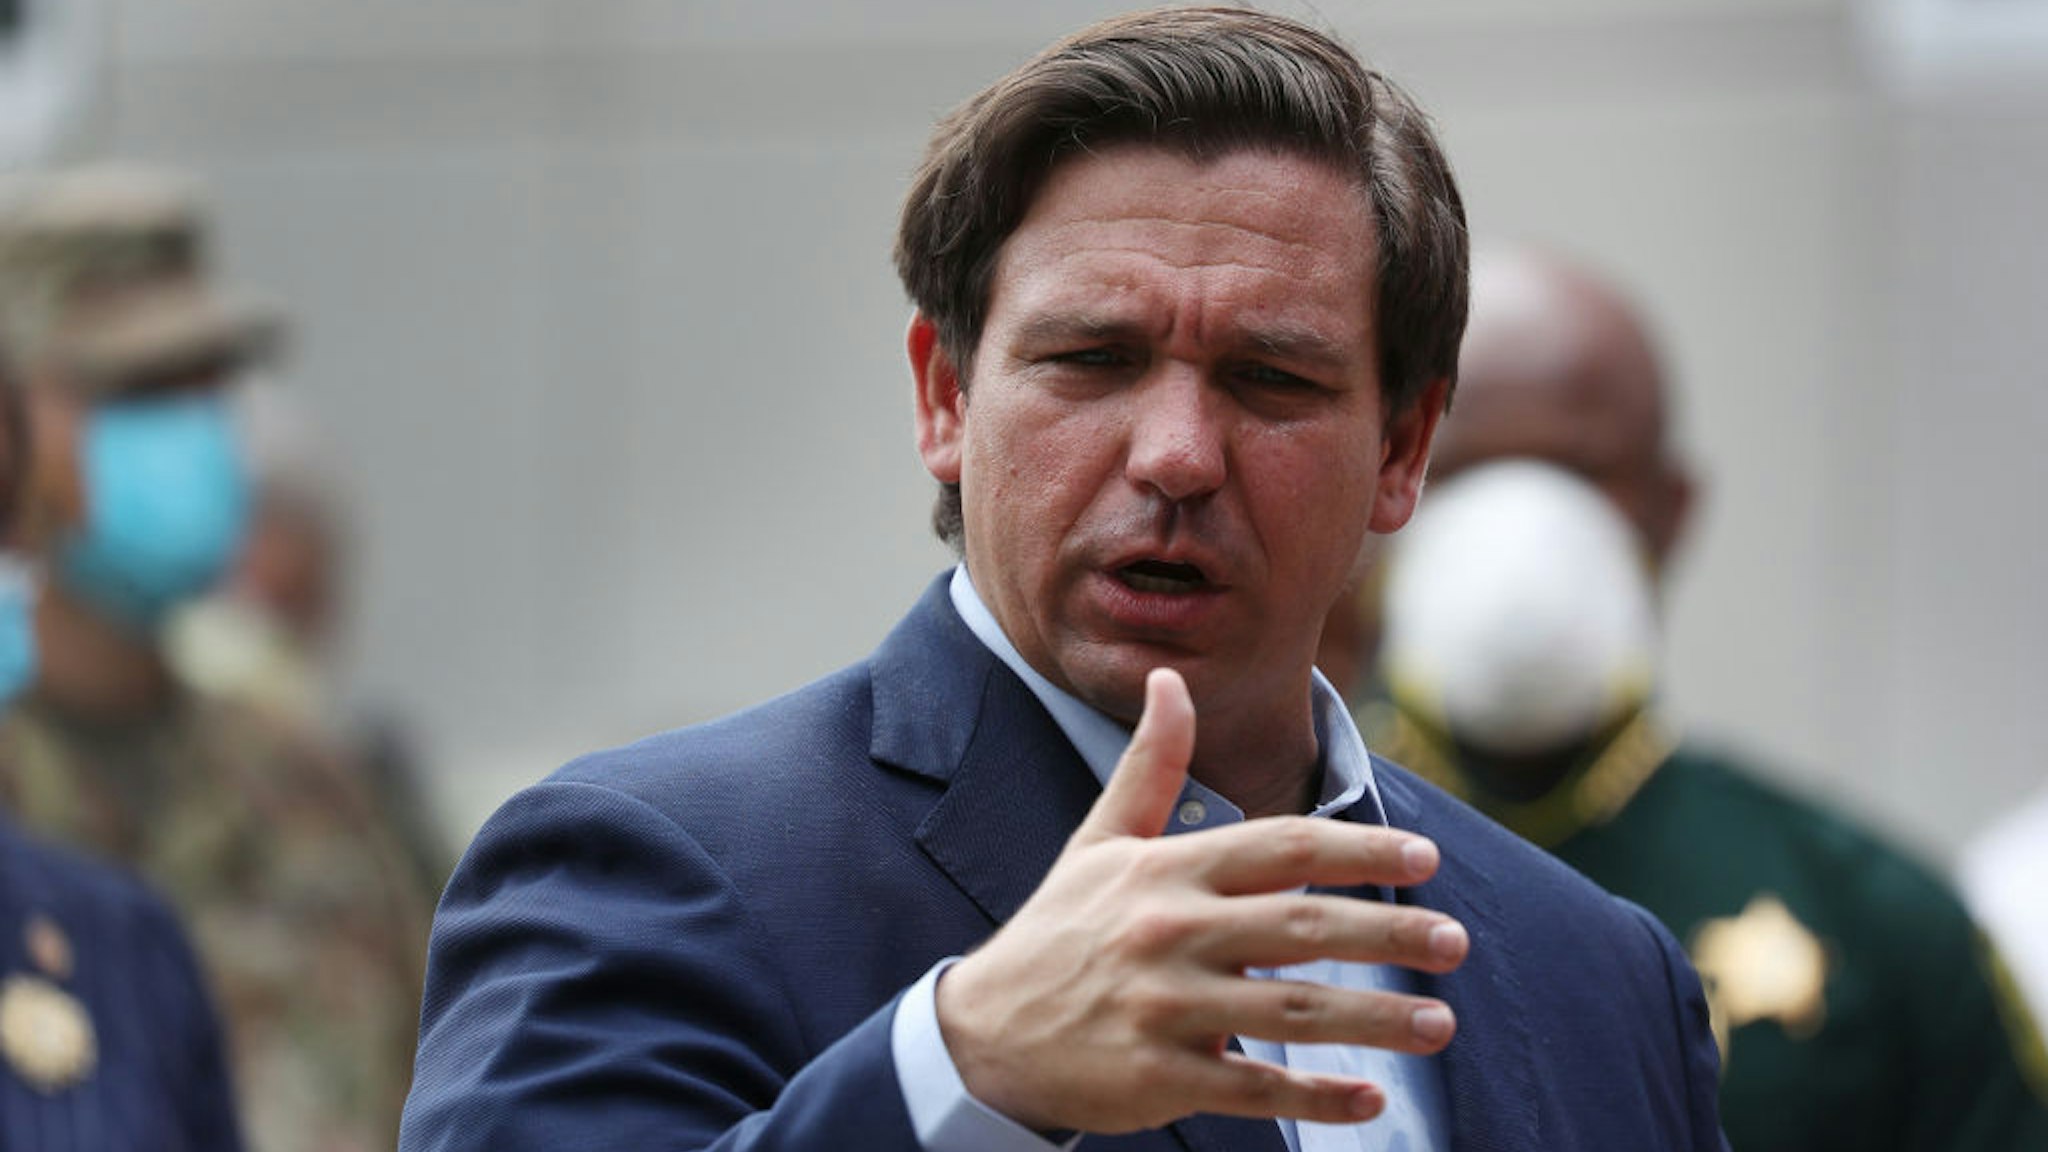 Florida Gov. Ron DeSantis gives updates about the state's response to the coronavirus pandemic during a press conference on April 17, 2020 in Fort Lauderdale, Florida. The governor announced that starting Saturday, two walk-up testing sites will open in Broward County ‚Äî one at the Urban League of Broward County in Fort Lauderdale and the other at Mitchell Moore Park in Pompano Beach. (Photo by Joe Raedle/Getty Images)